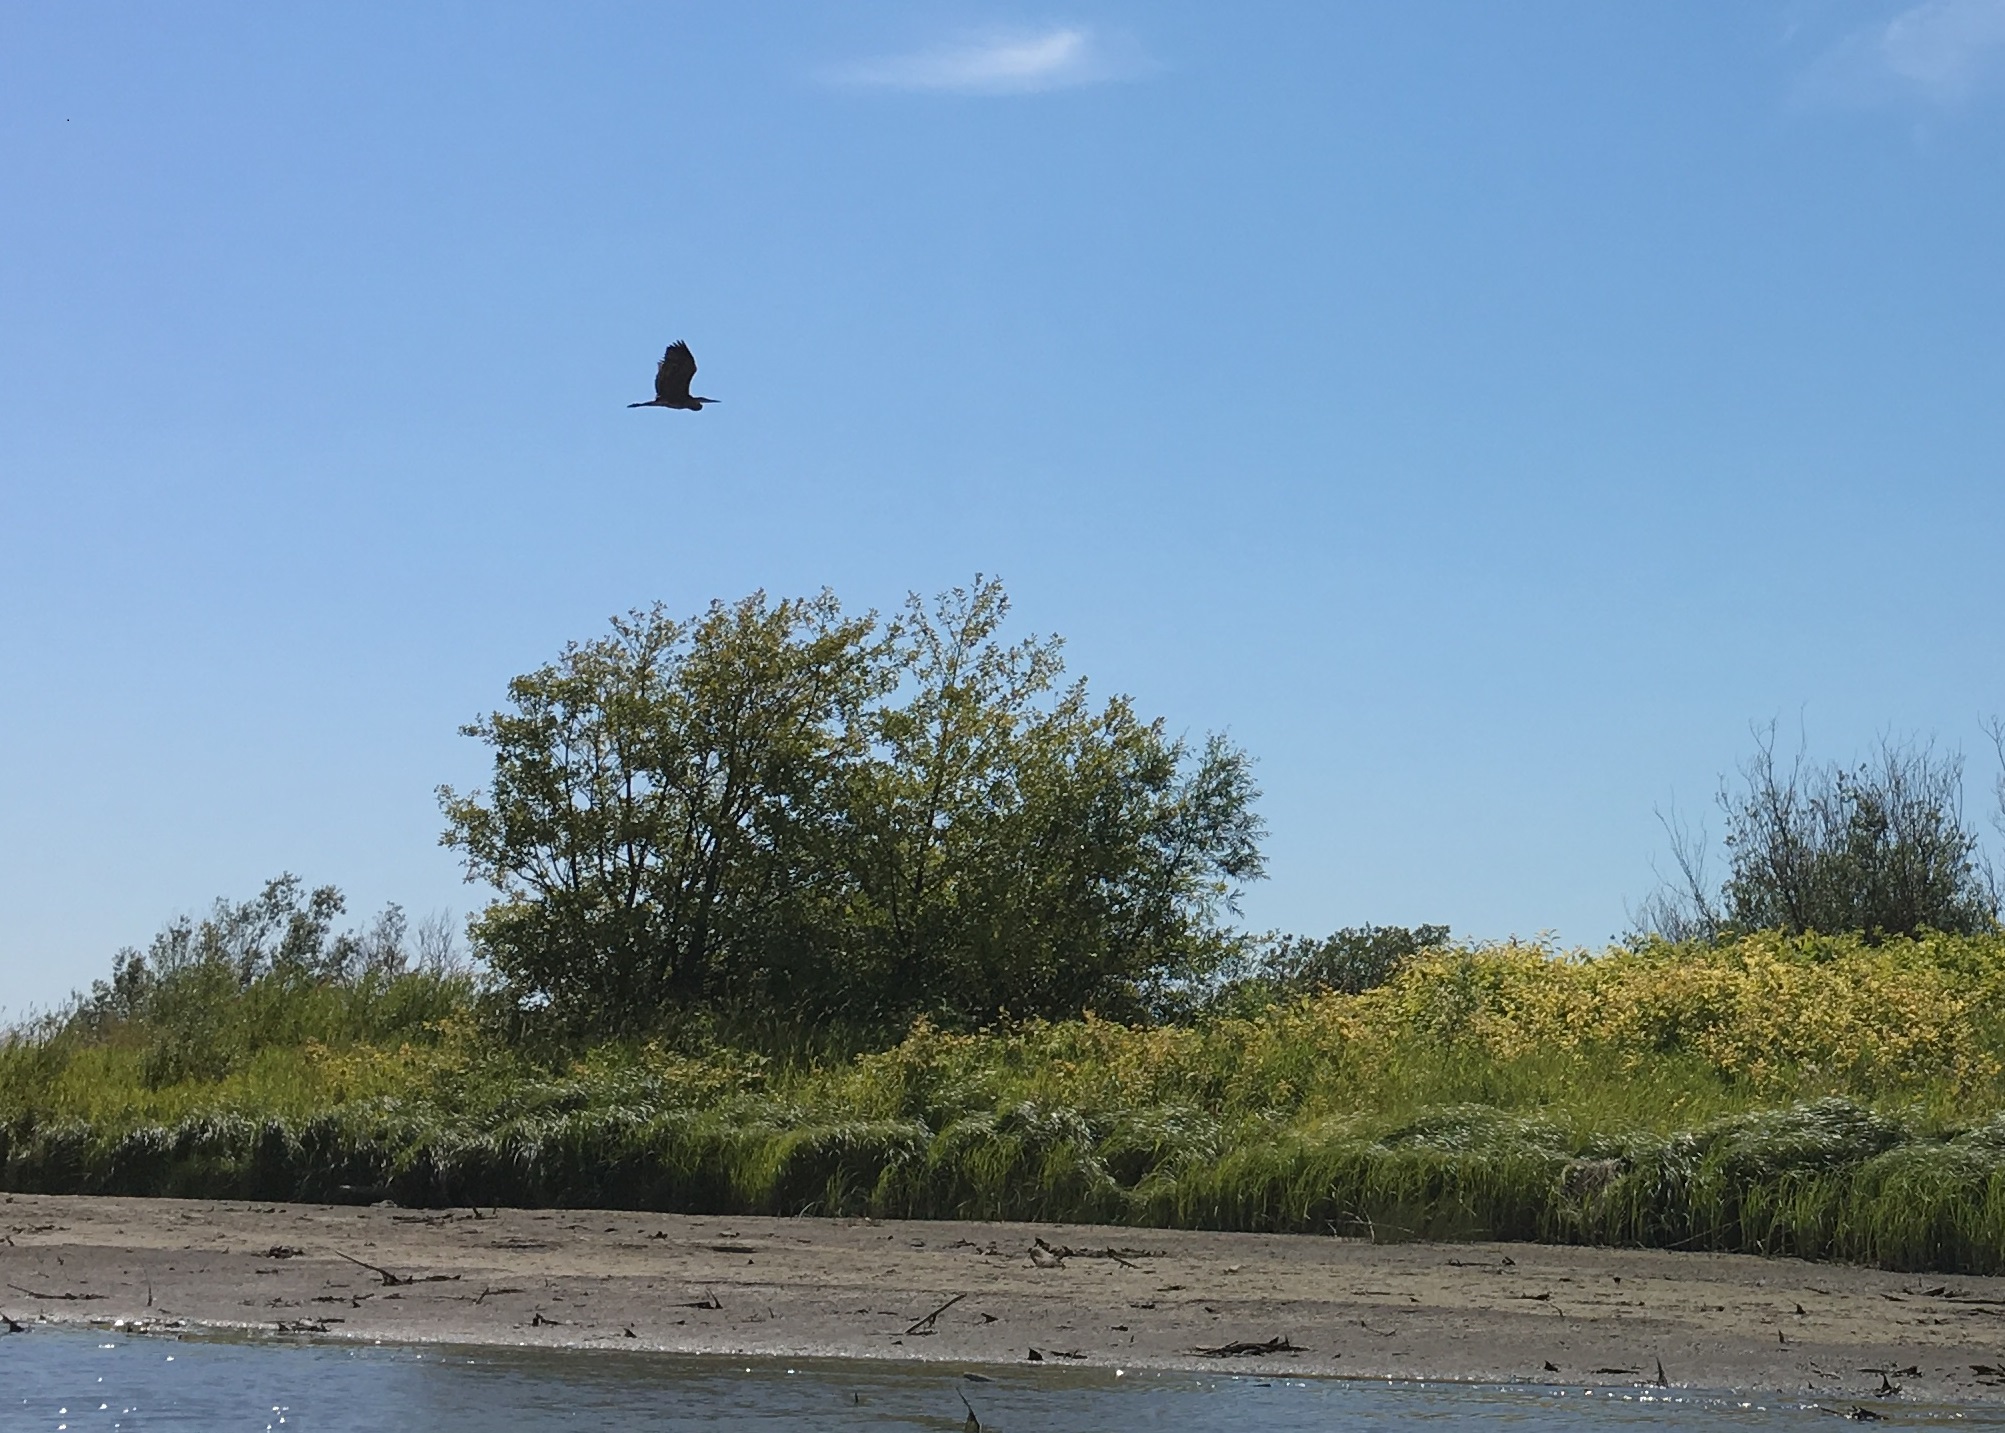 Sunny, blue sky, with a Great blue heron flying over the wetland's muddy bank next to the river.